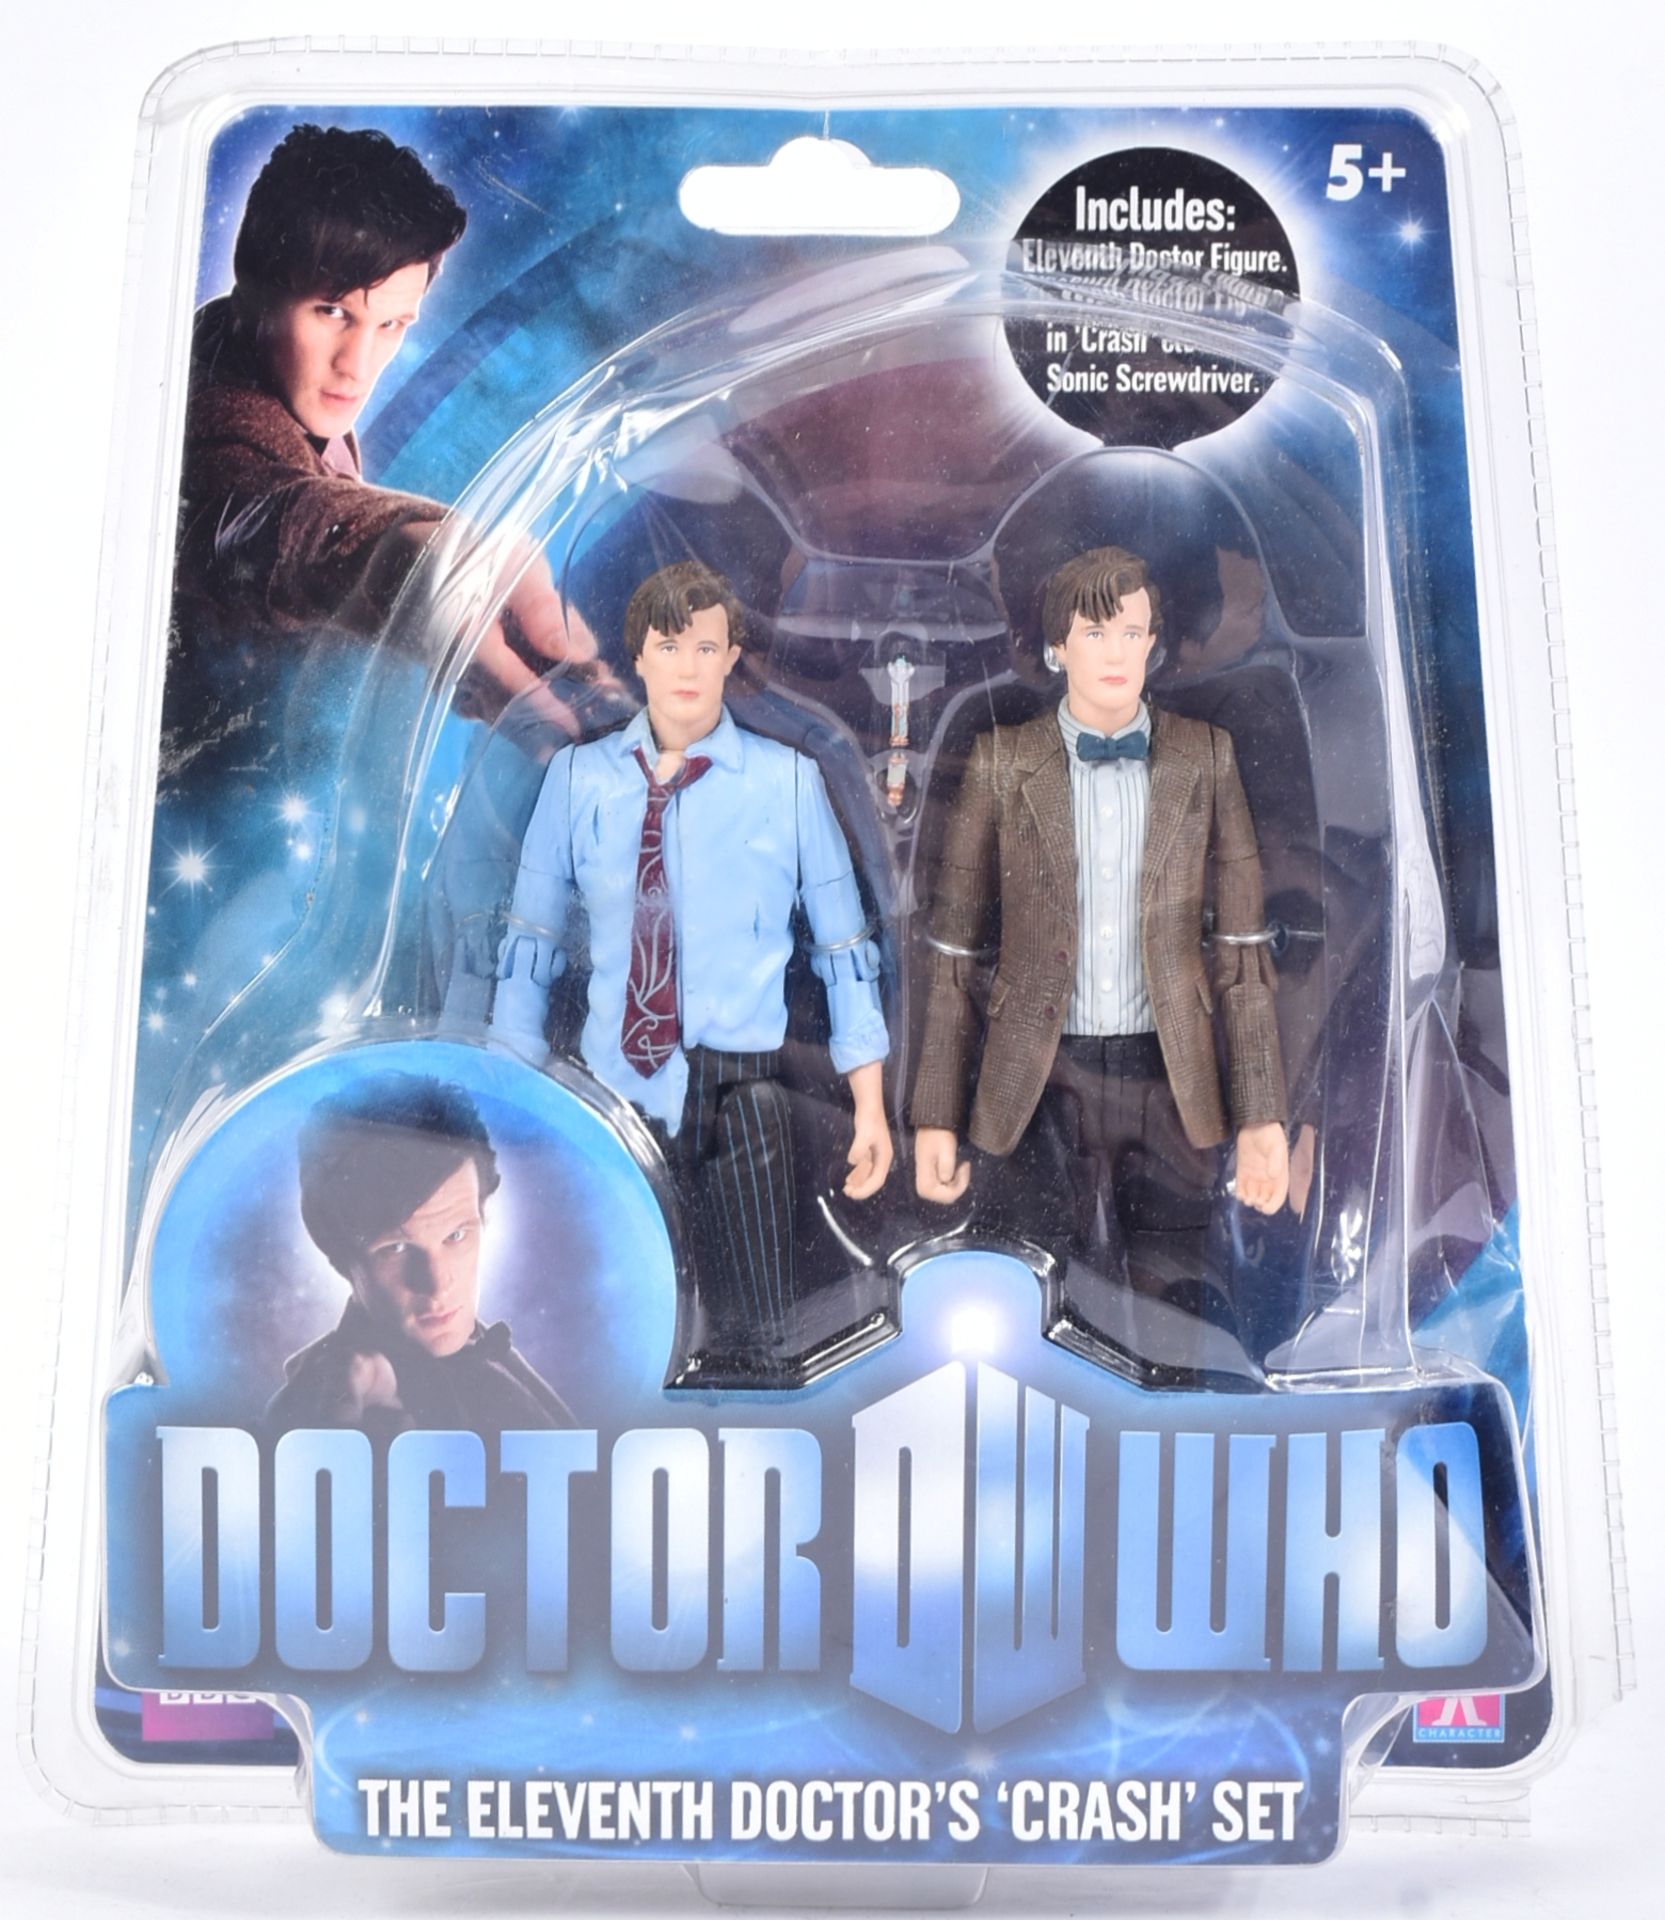 DOCTOR WHO - CHARACTER OPTIONS - THE ELEVENTH DOCTOR'S CRASH SET